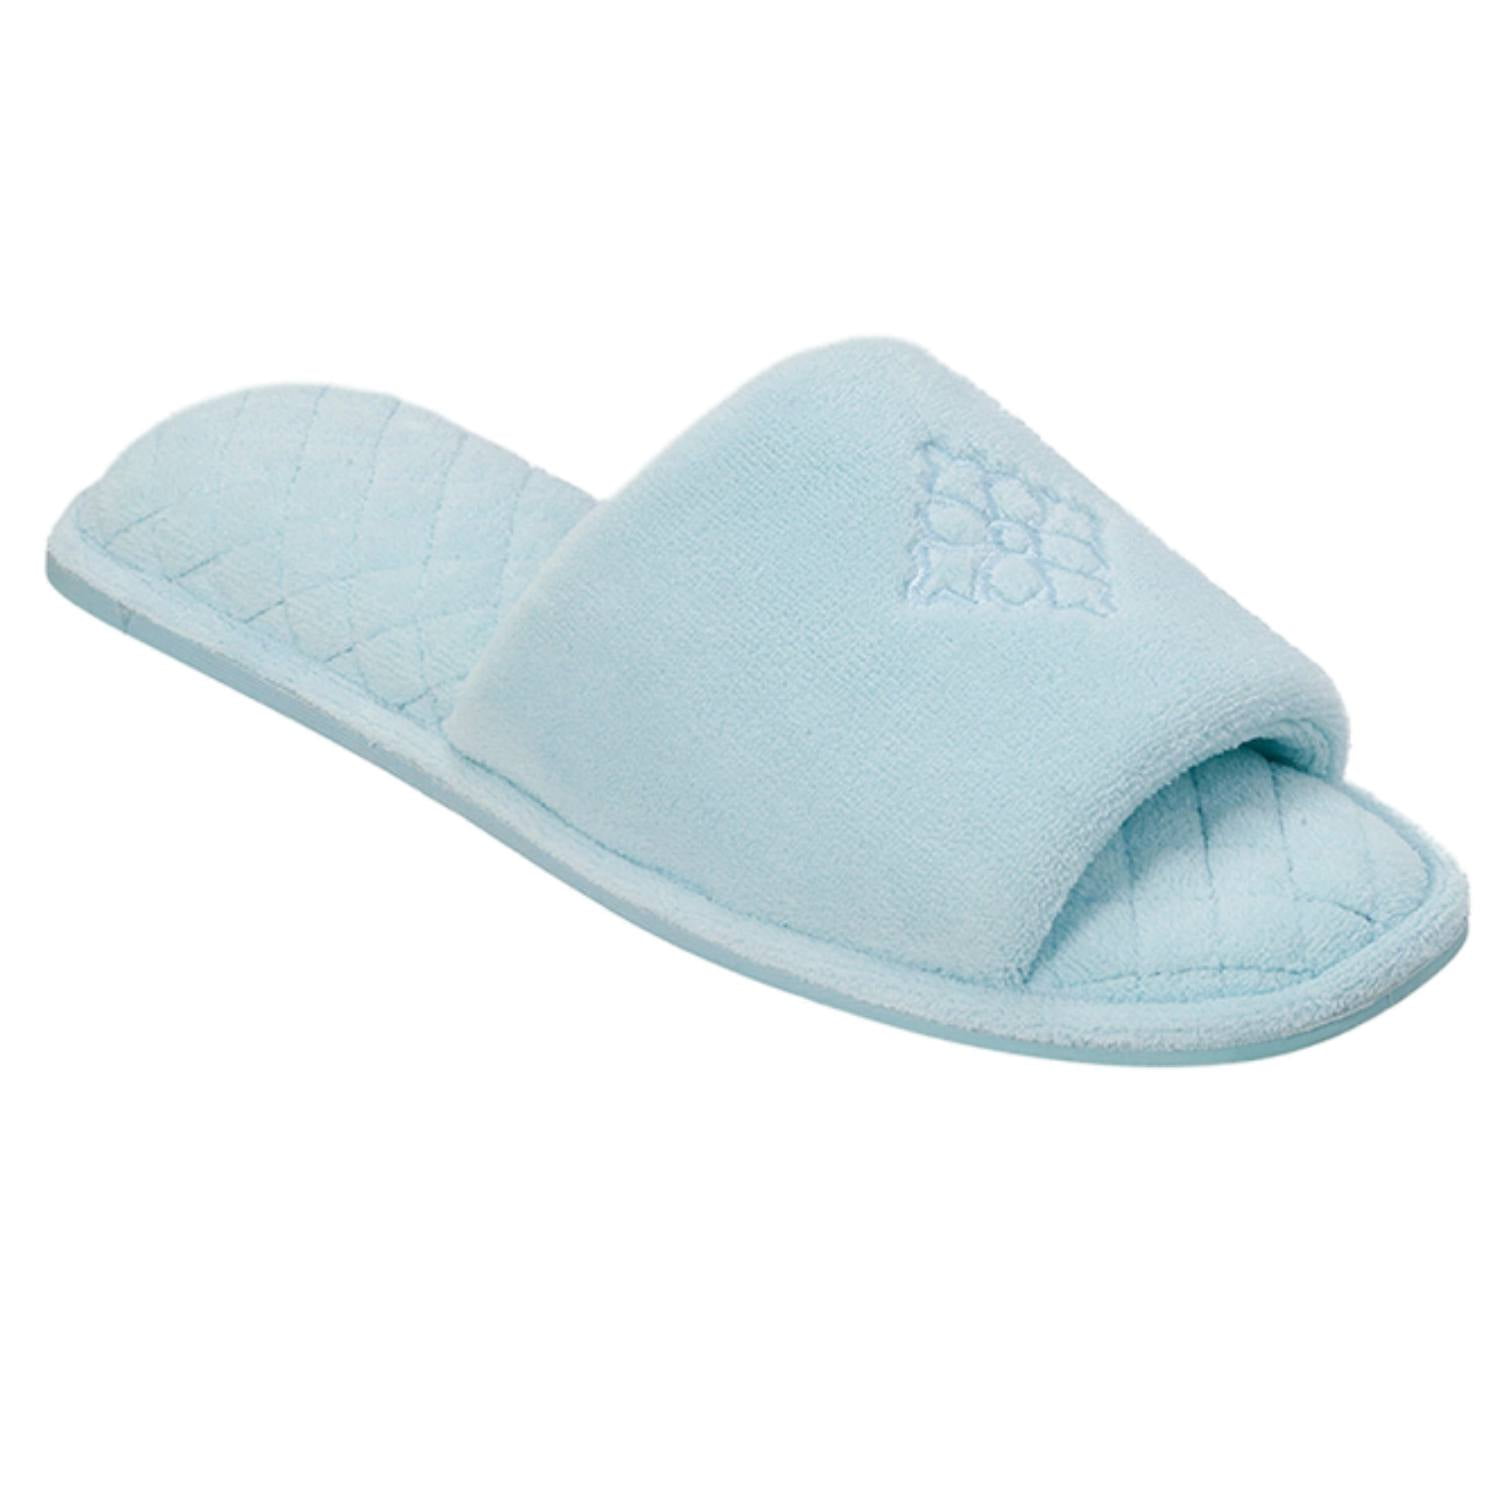 Moroccan Babouche Slippers I Suede Leather Light Blue Gray Babouche Shoes –  1000welcomes